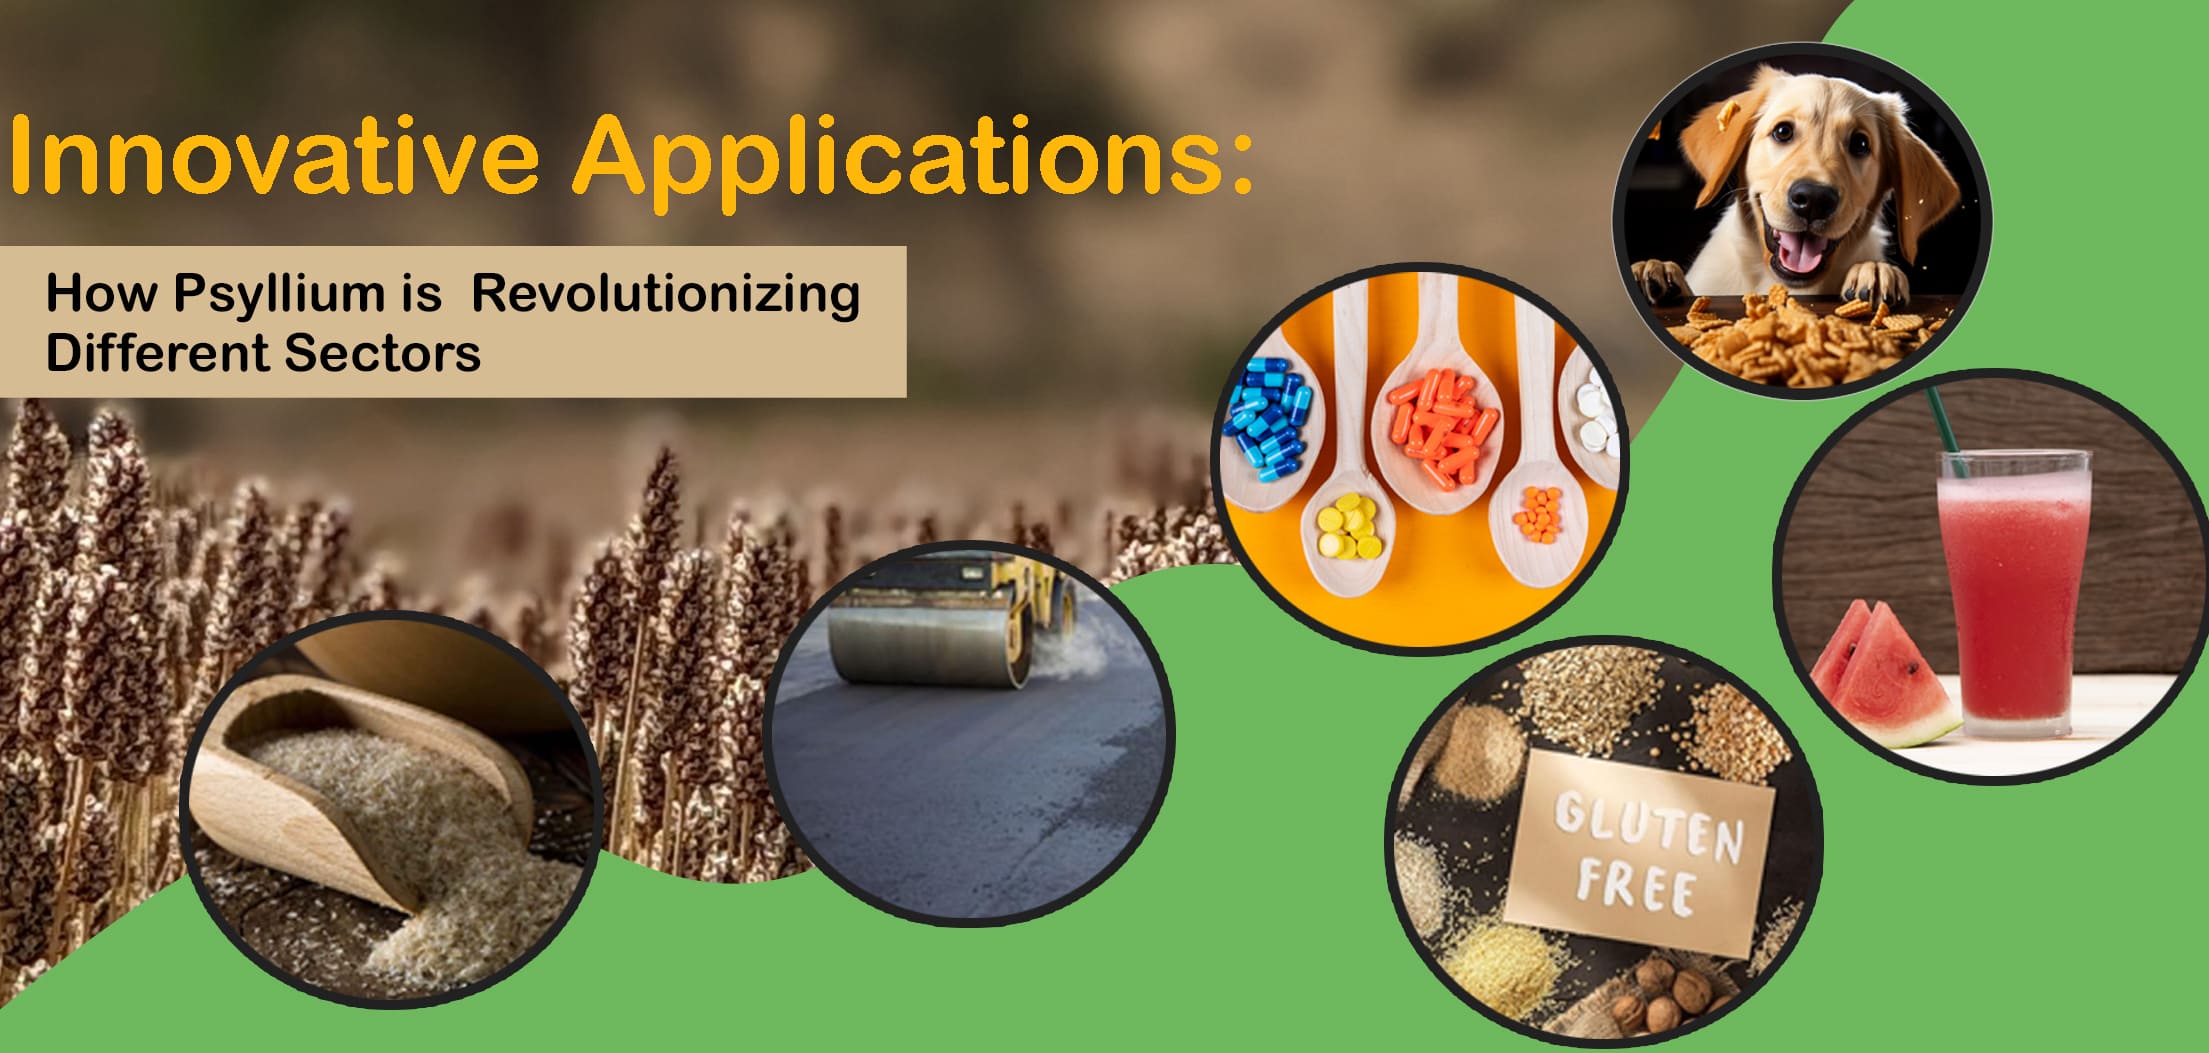  Innovative Applications: How Psyllium is Revolutionizing Different Sectors